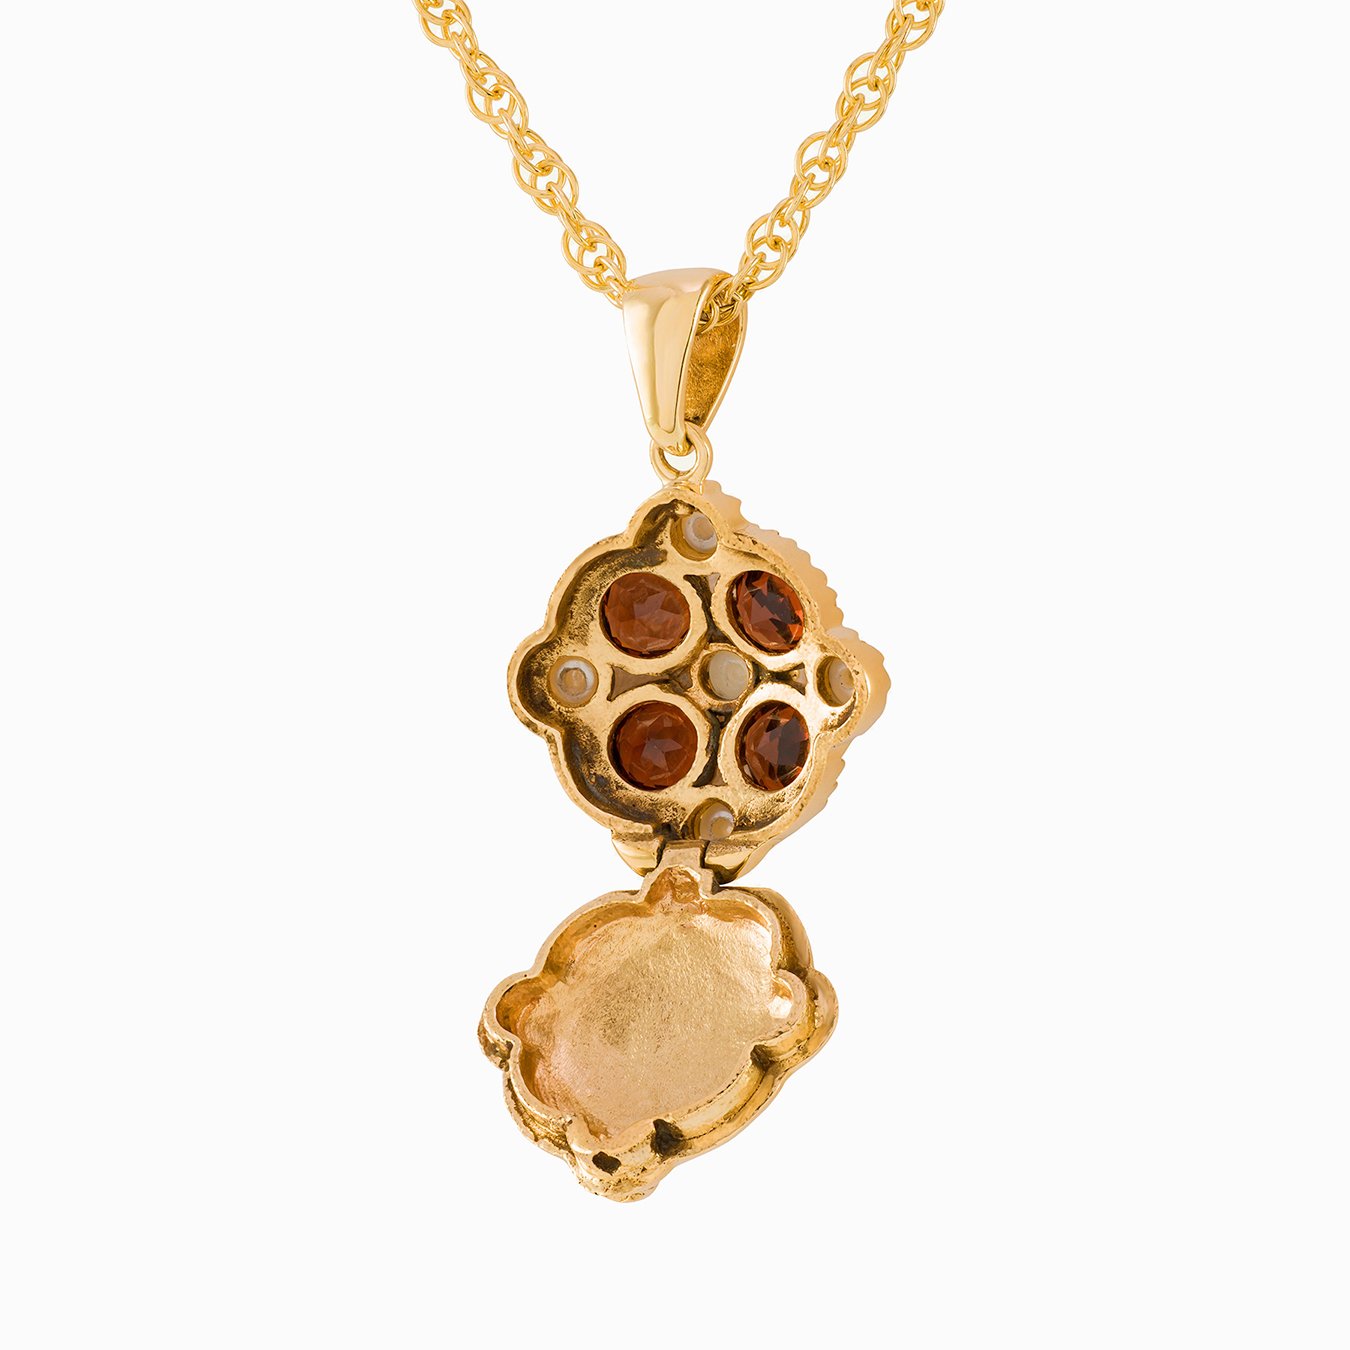 Open view of a 9 ct gold tipped square locket set with garnets and seed pearls, on a 9 ct rope chain